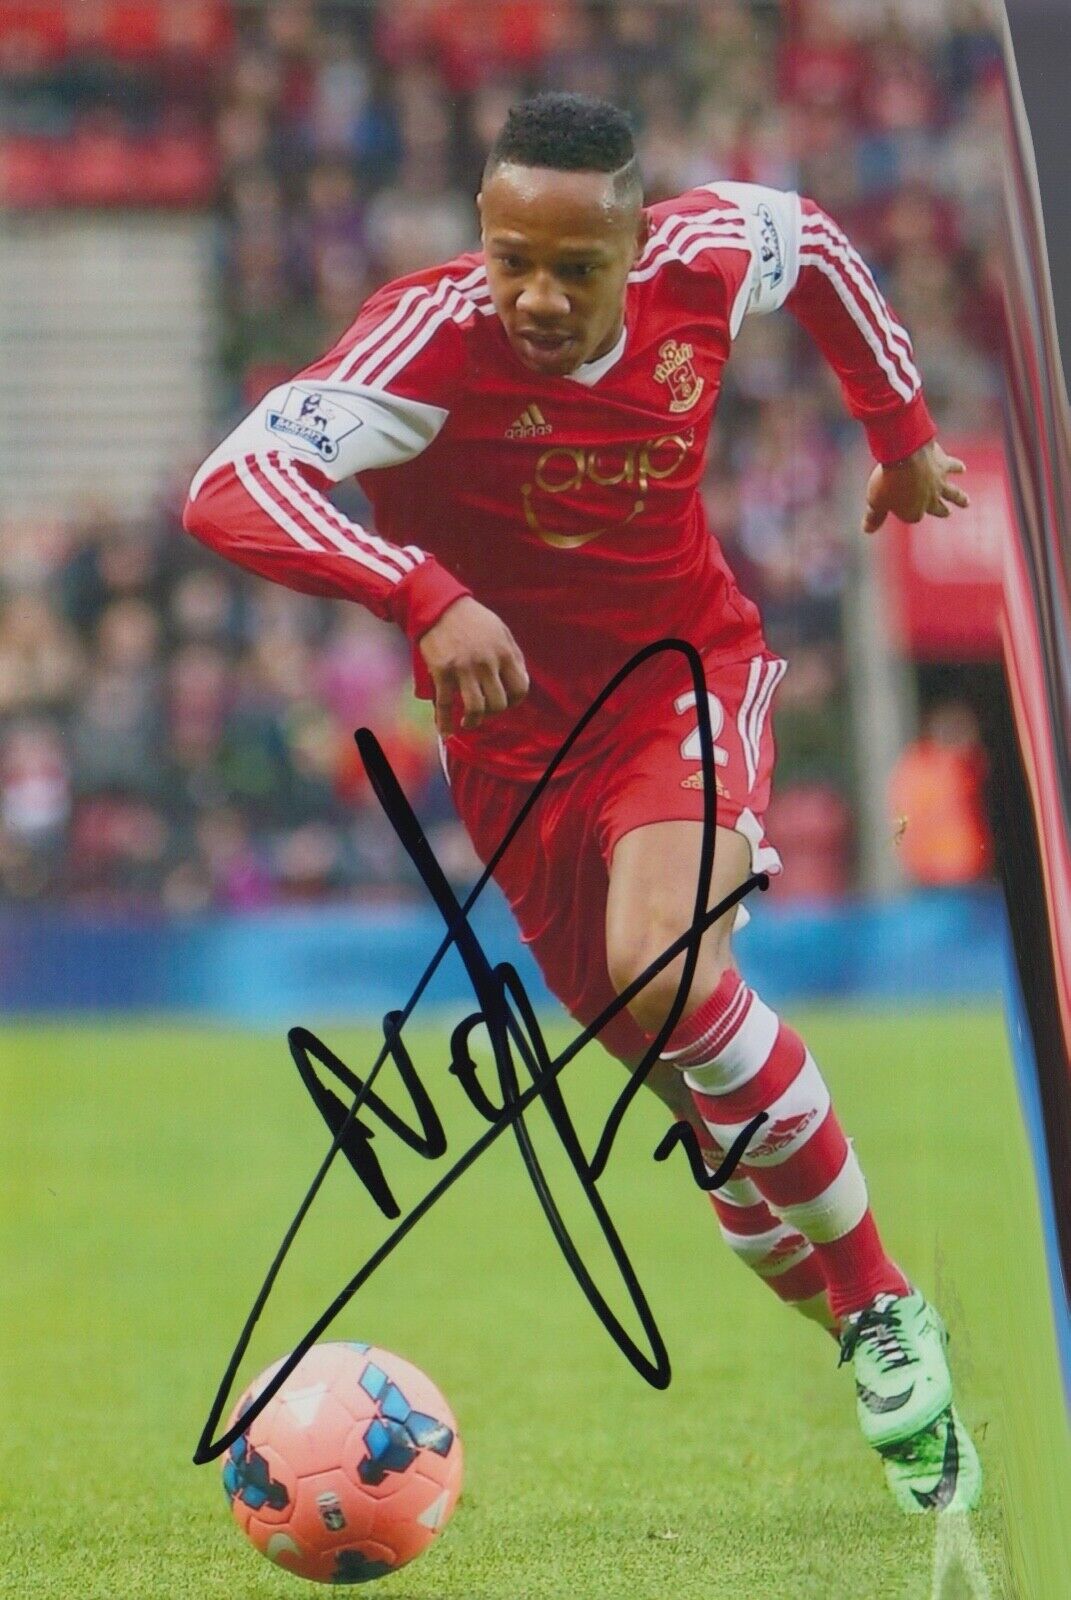 NATHANIEL CLYNE HAND SIGNED 6X4 Photo Poster painting - FOOTBALL AUTOGRAPH - SOUTHAMPTON.